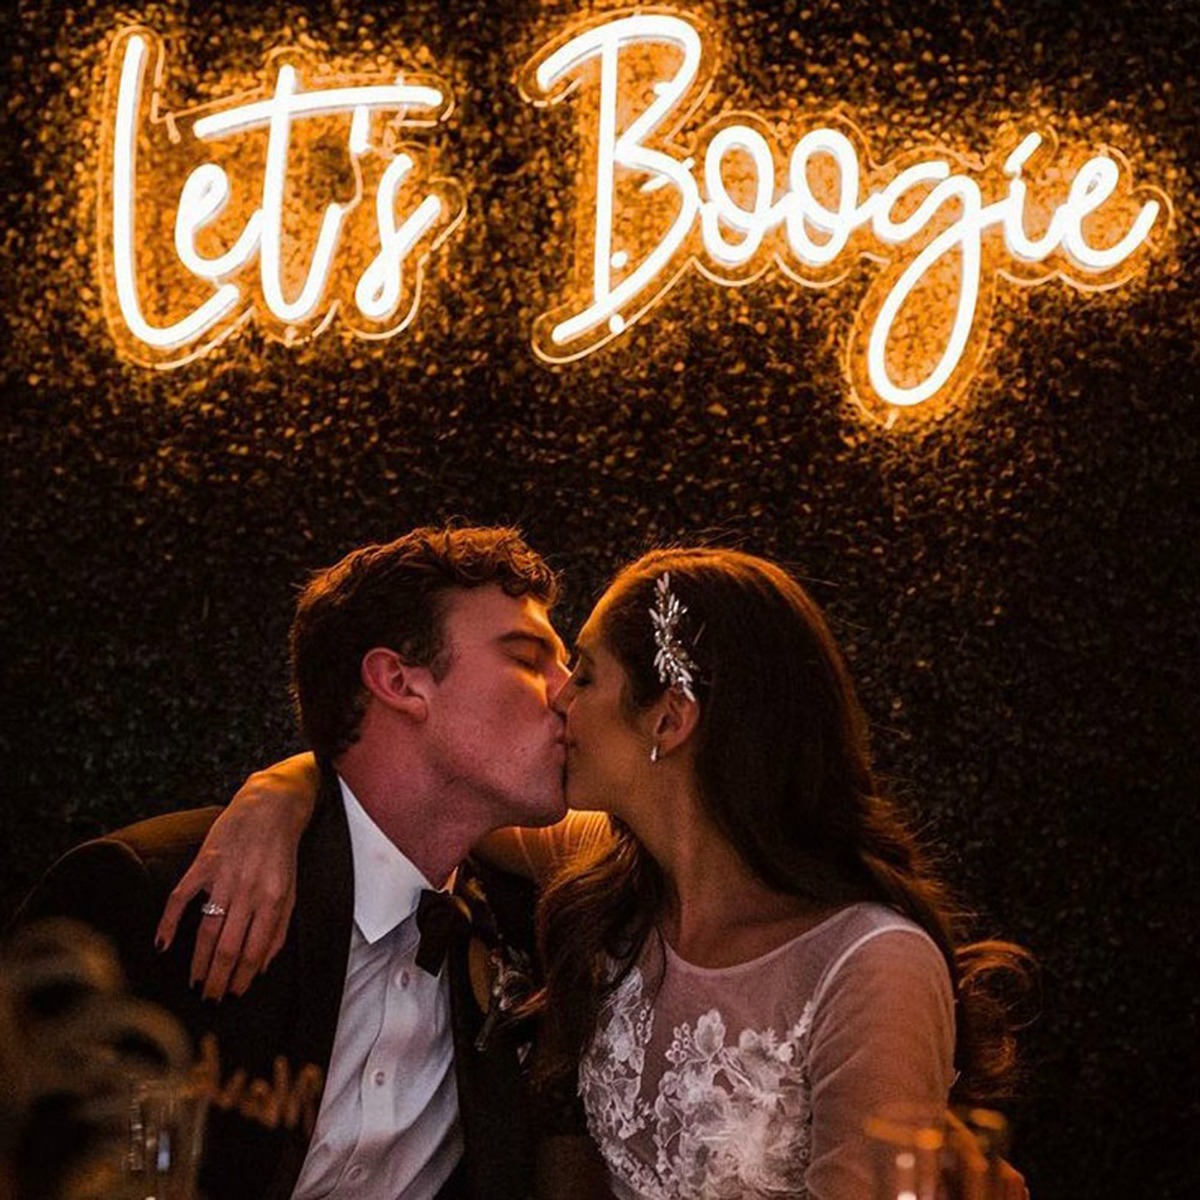 Let's Boogie wedding sign